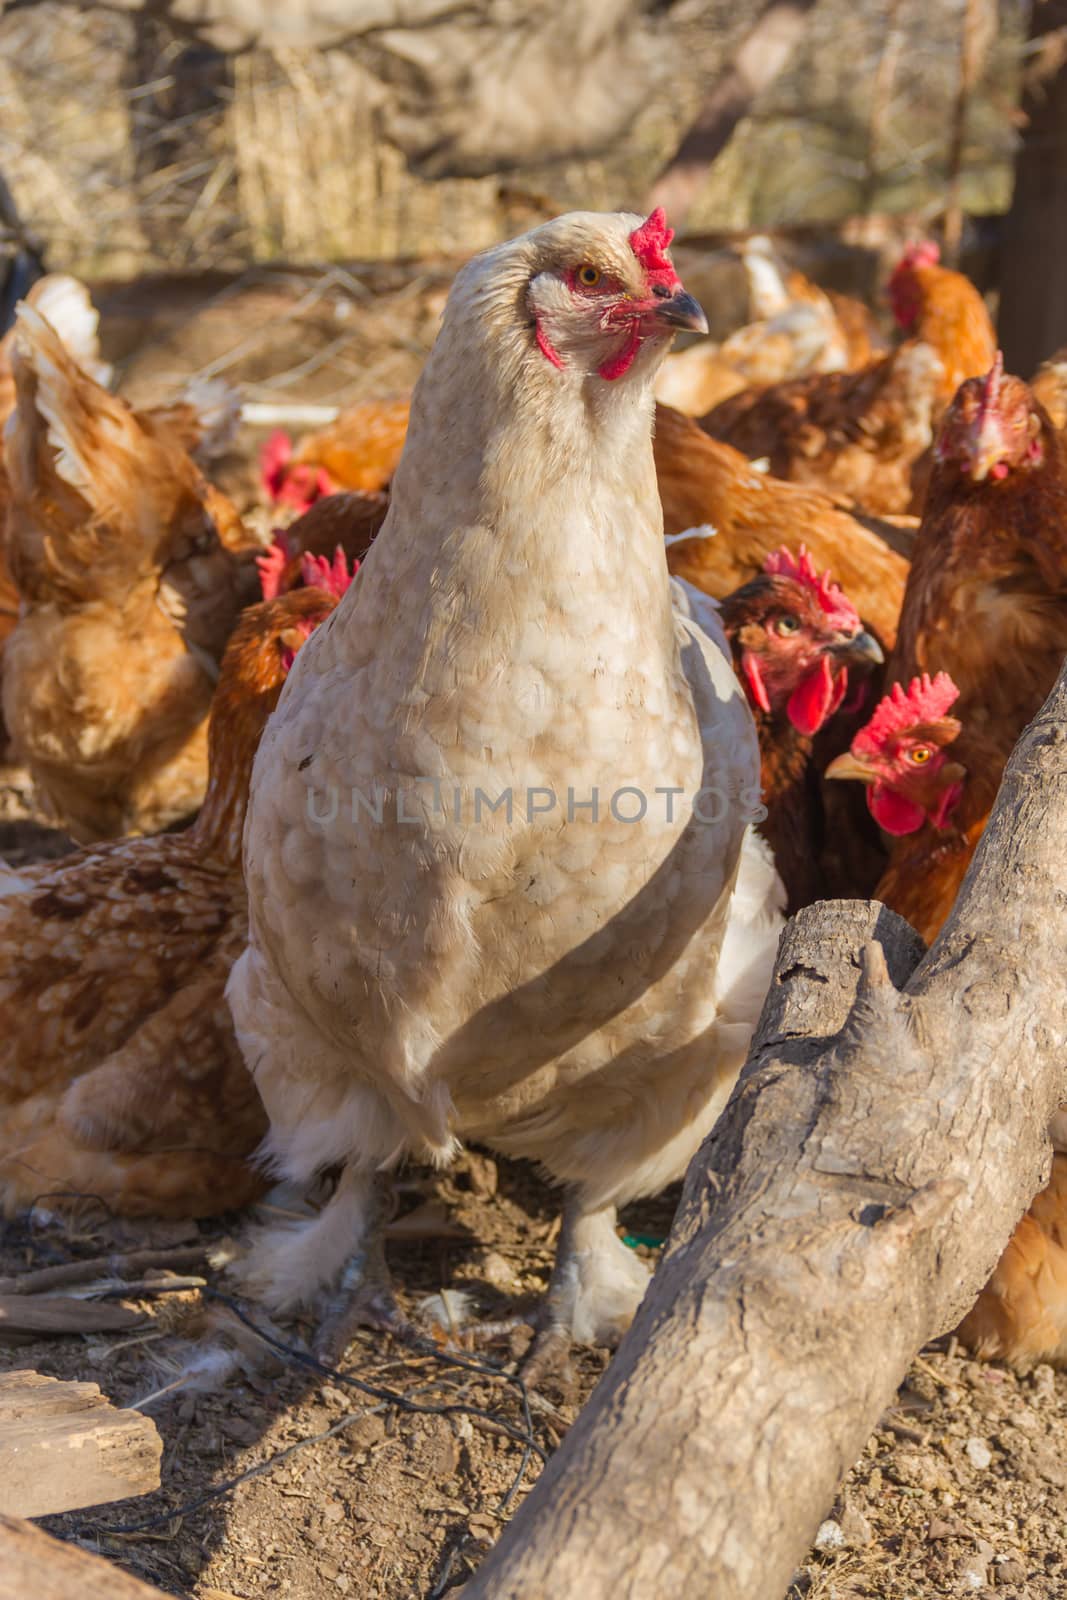 white brahma hen with feathers on the feet in the henhouse